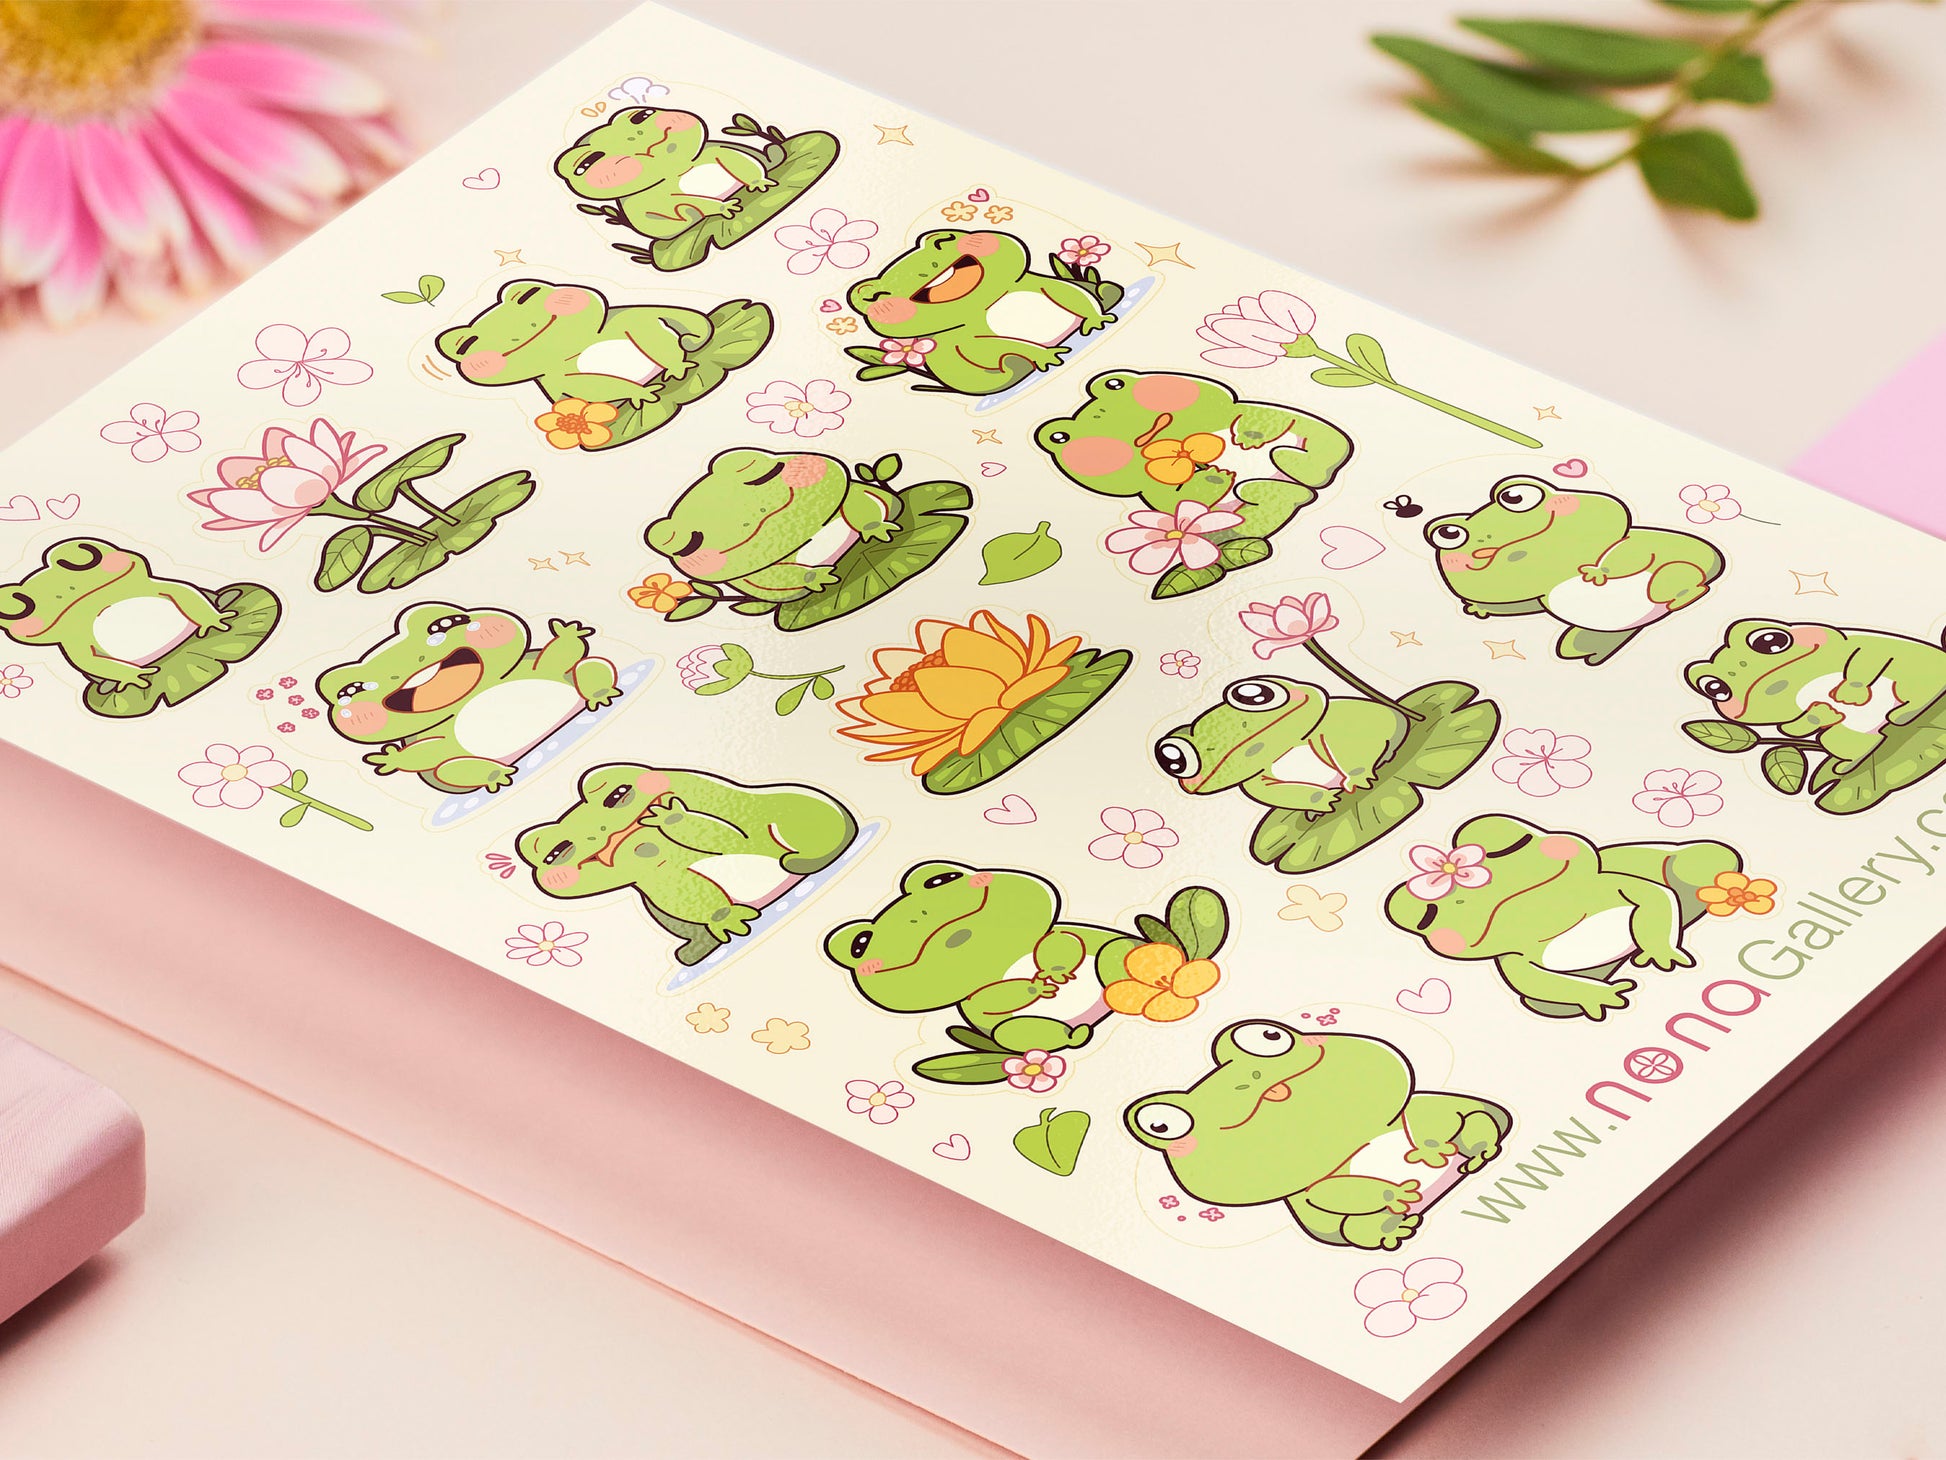 A large pastel coloured gloss vinyl sticker sheet with multiple cute frogs and lily pad stickers